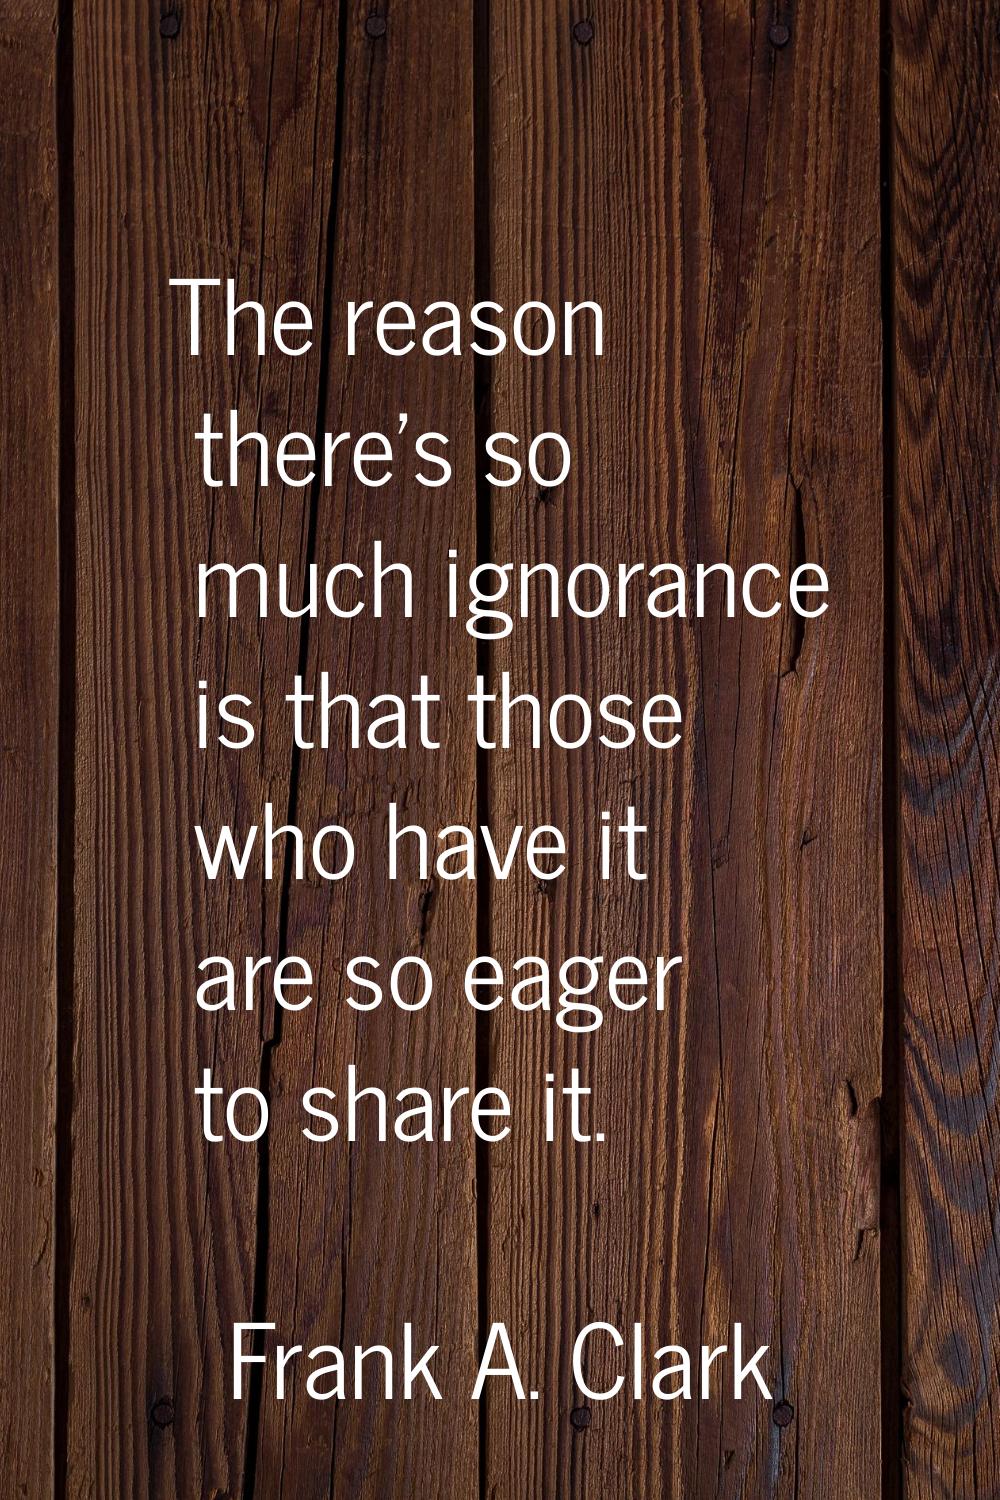 The reason there's so much ignorance is that those who have it are so eager to share it.